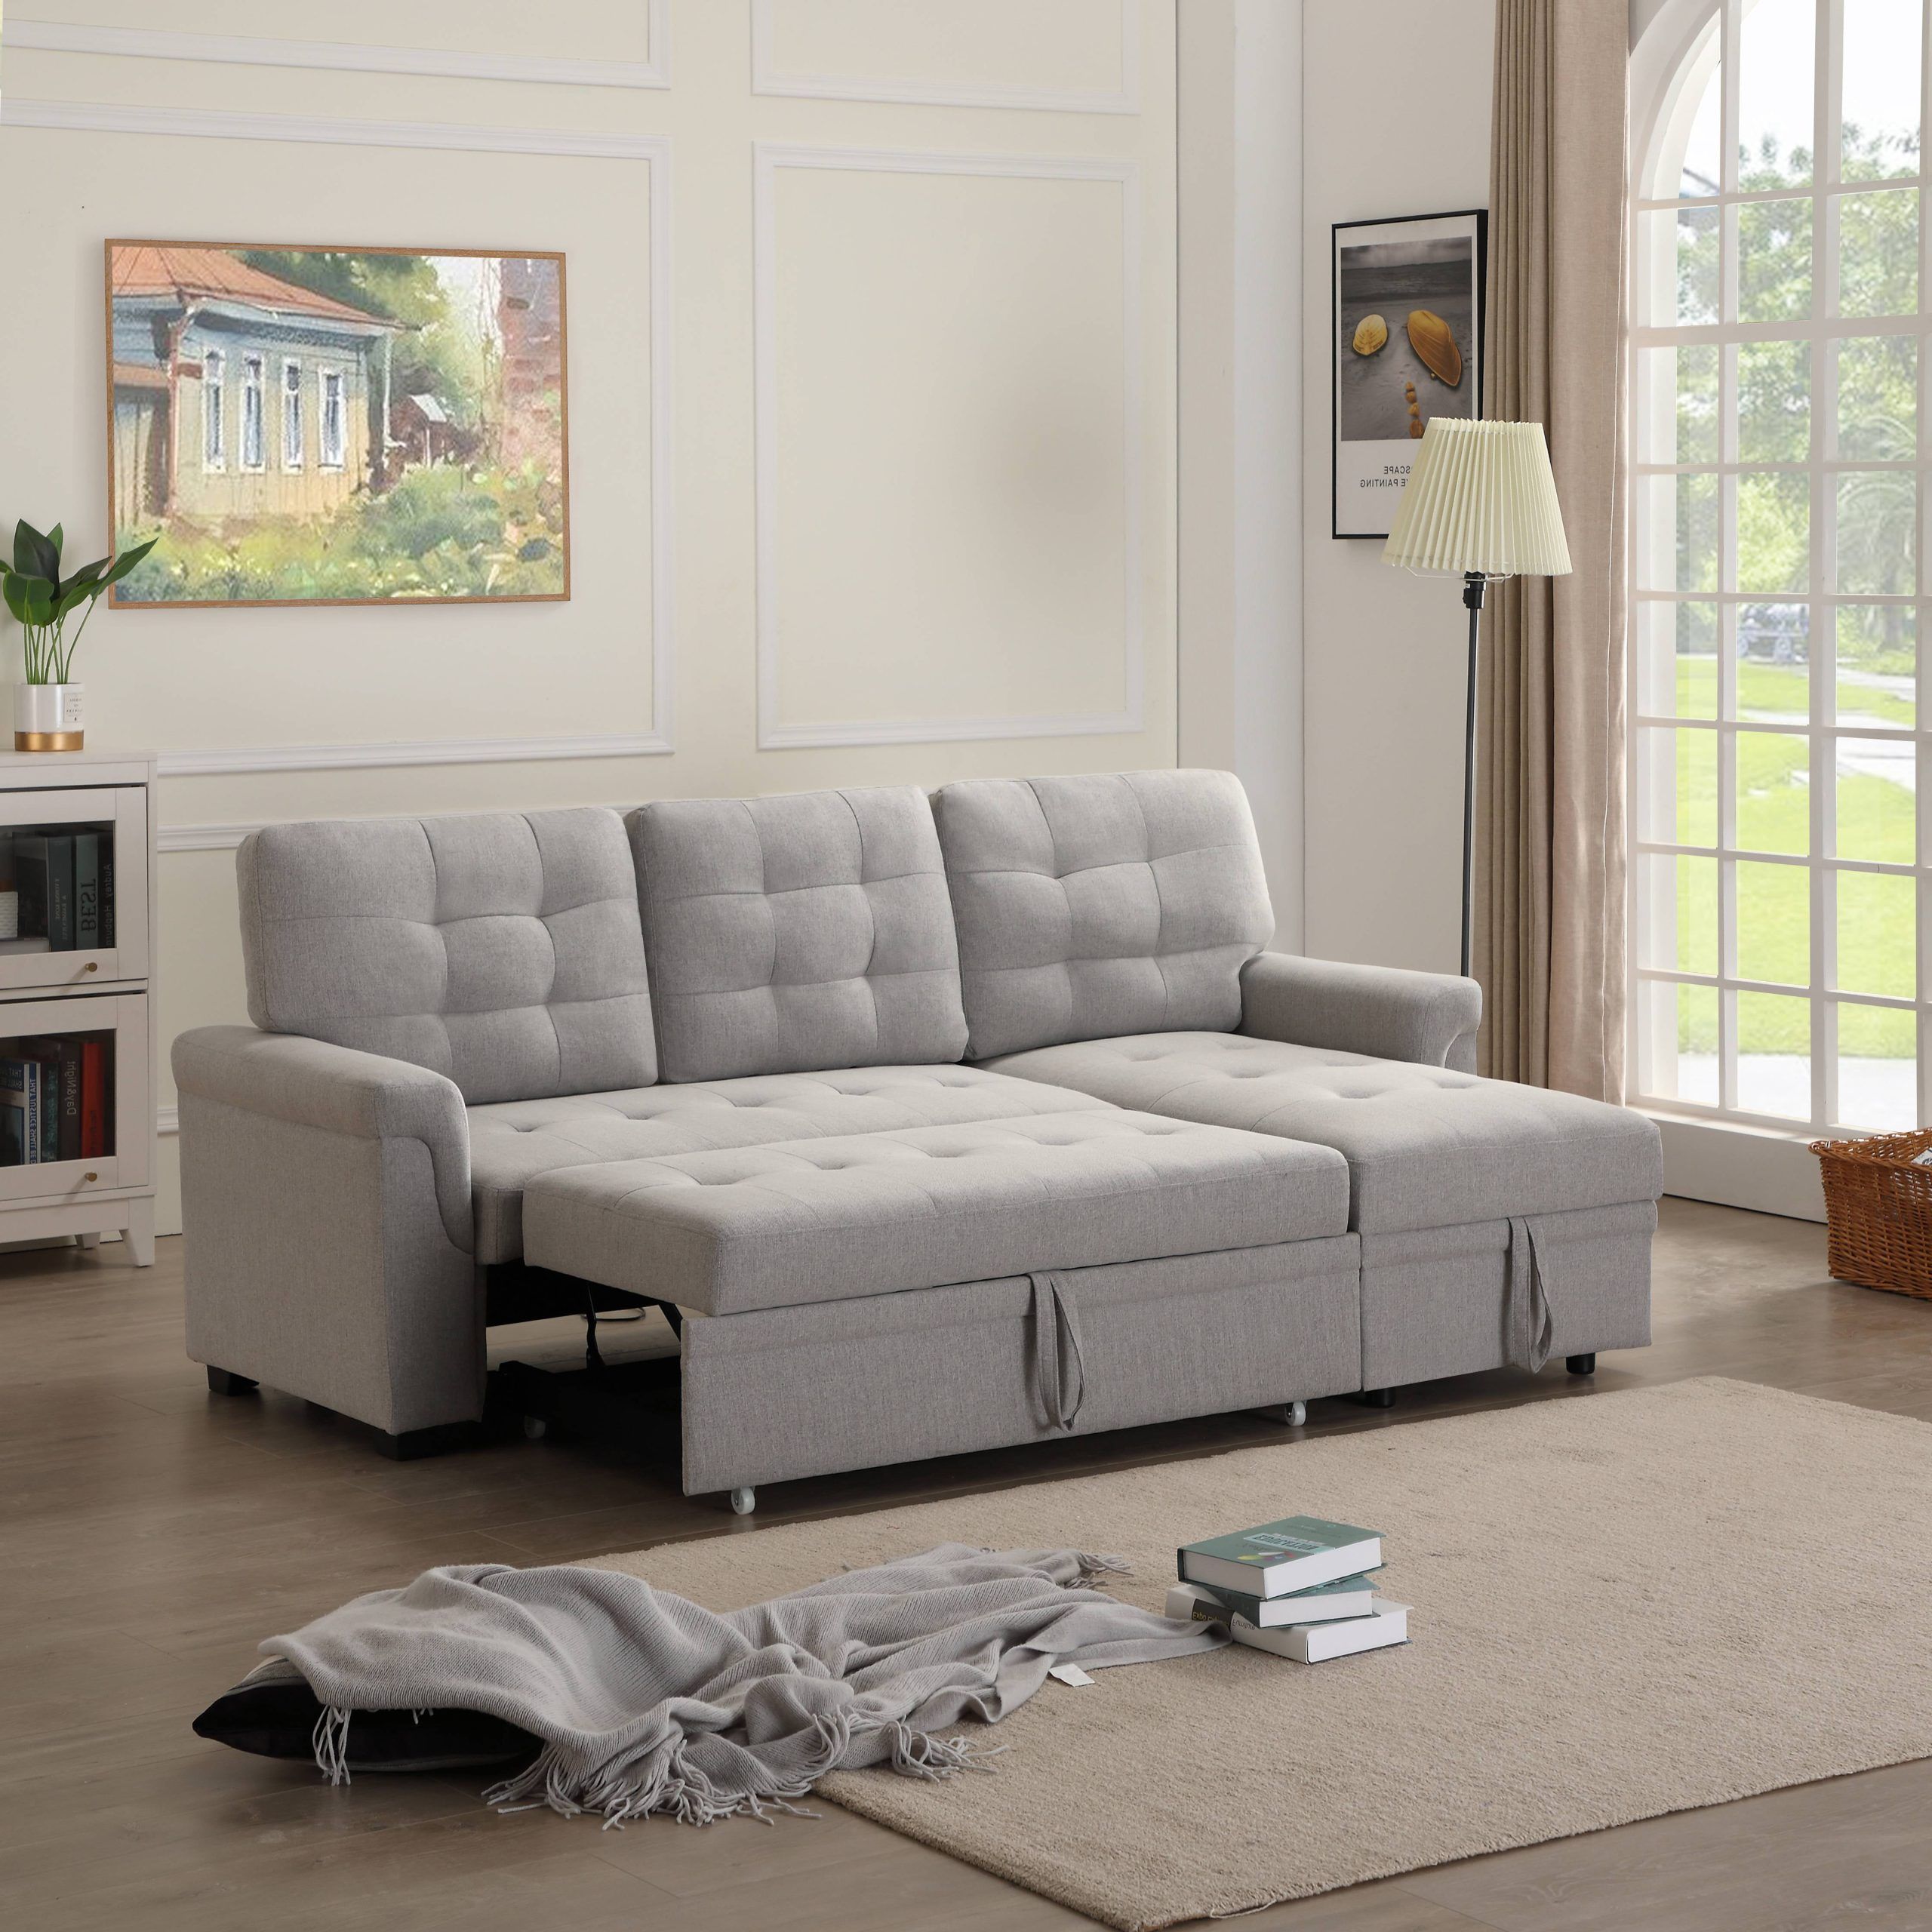 Modern Sleeper Sectional Sofa With Fold Out Twin Size Sleeper, 33'' X With Regard To 3 In 1 Gray Pull Out Sleeper Sofas (View 10 of 20)